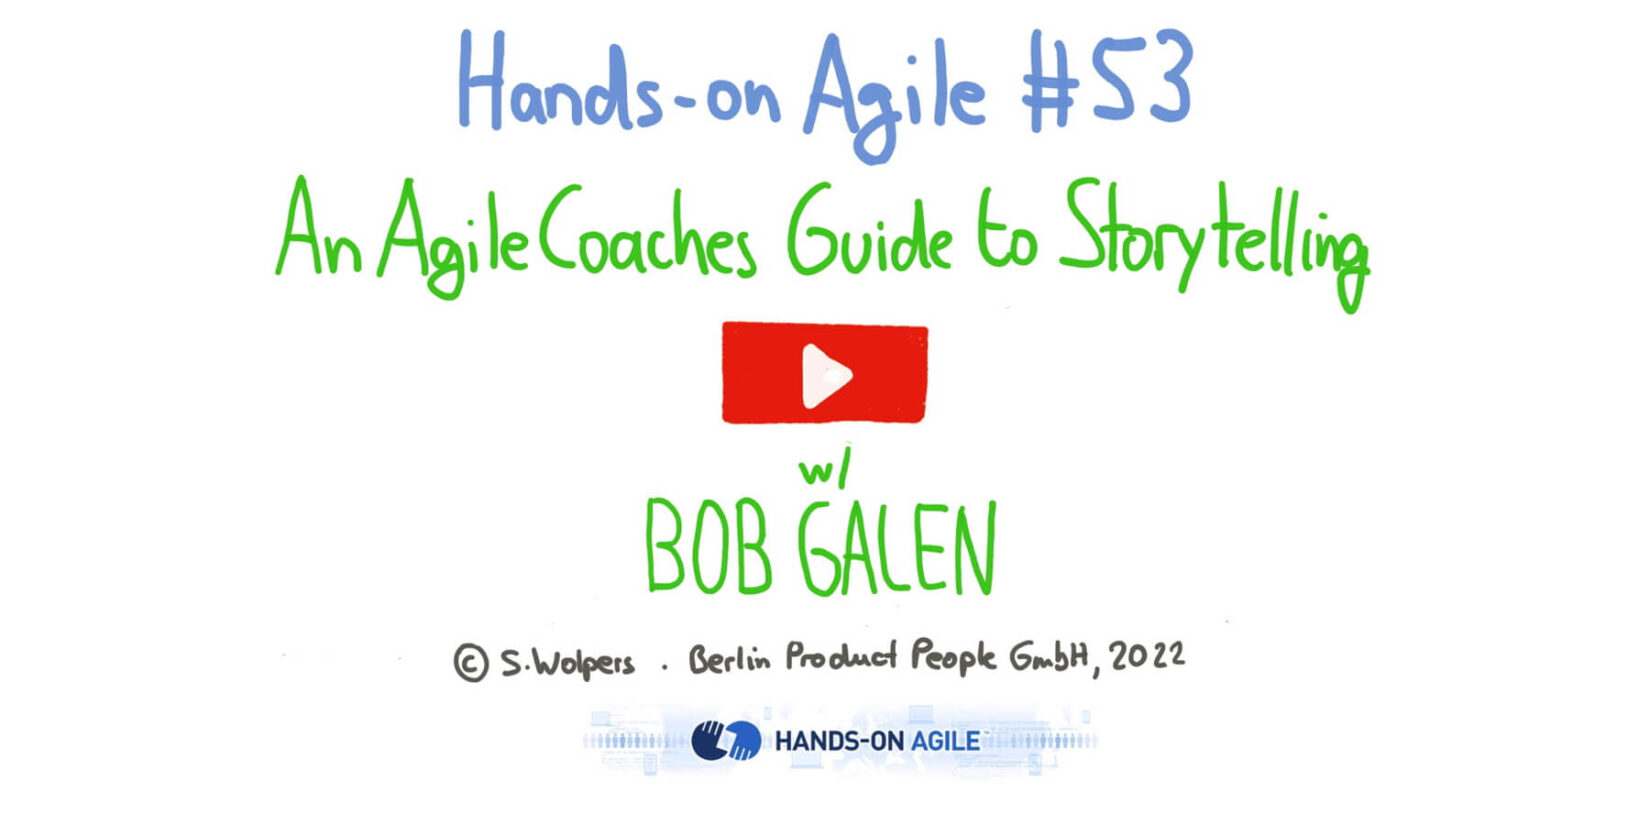 An Agile Coaches Guide to Storytelling — Bob Galen at the 53. Hands-on Agile